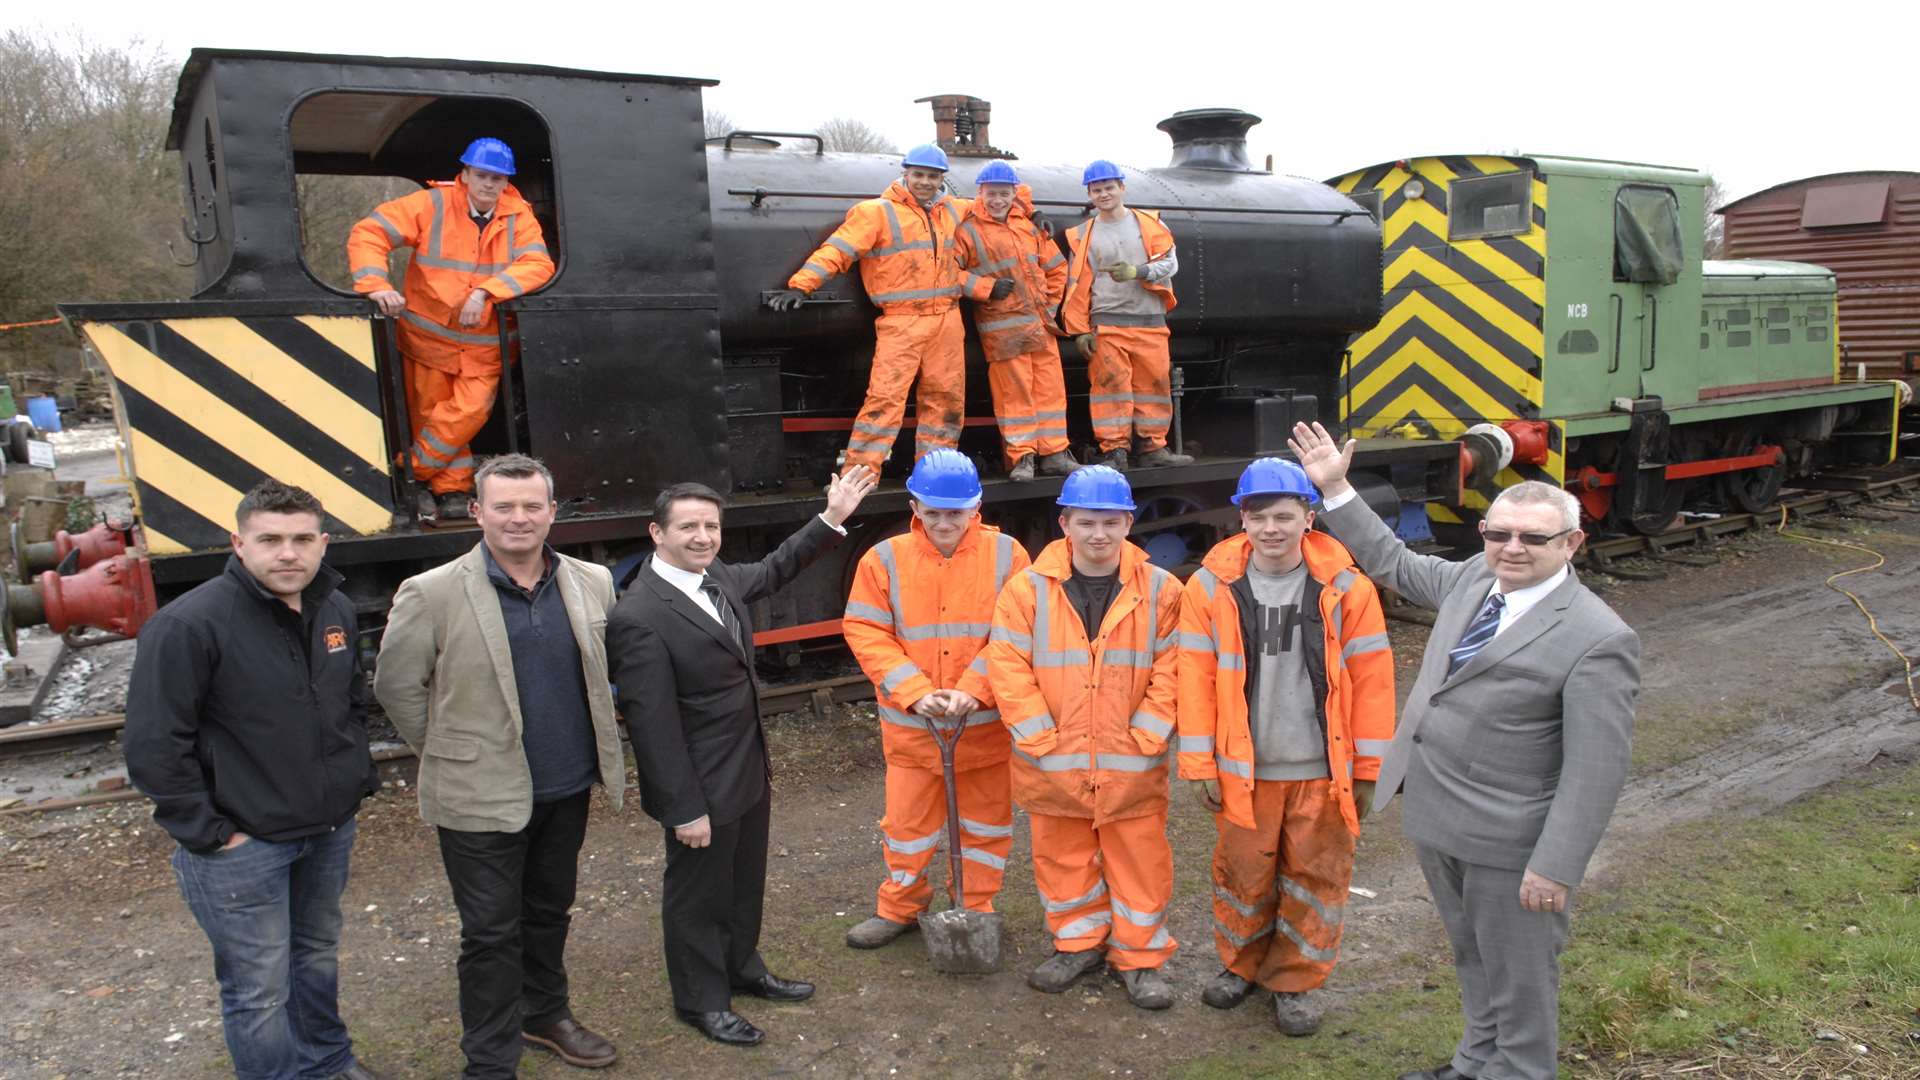 Organisers and apprentices at East Kent Railway, a heritage line that used to transport coal across the Kent Coalfield.